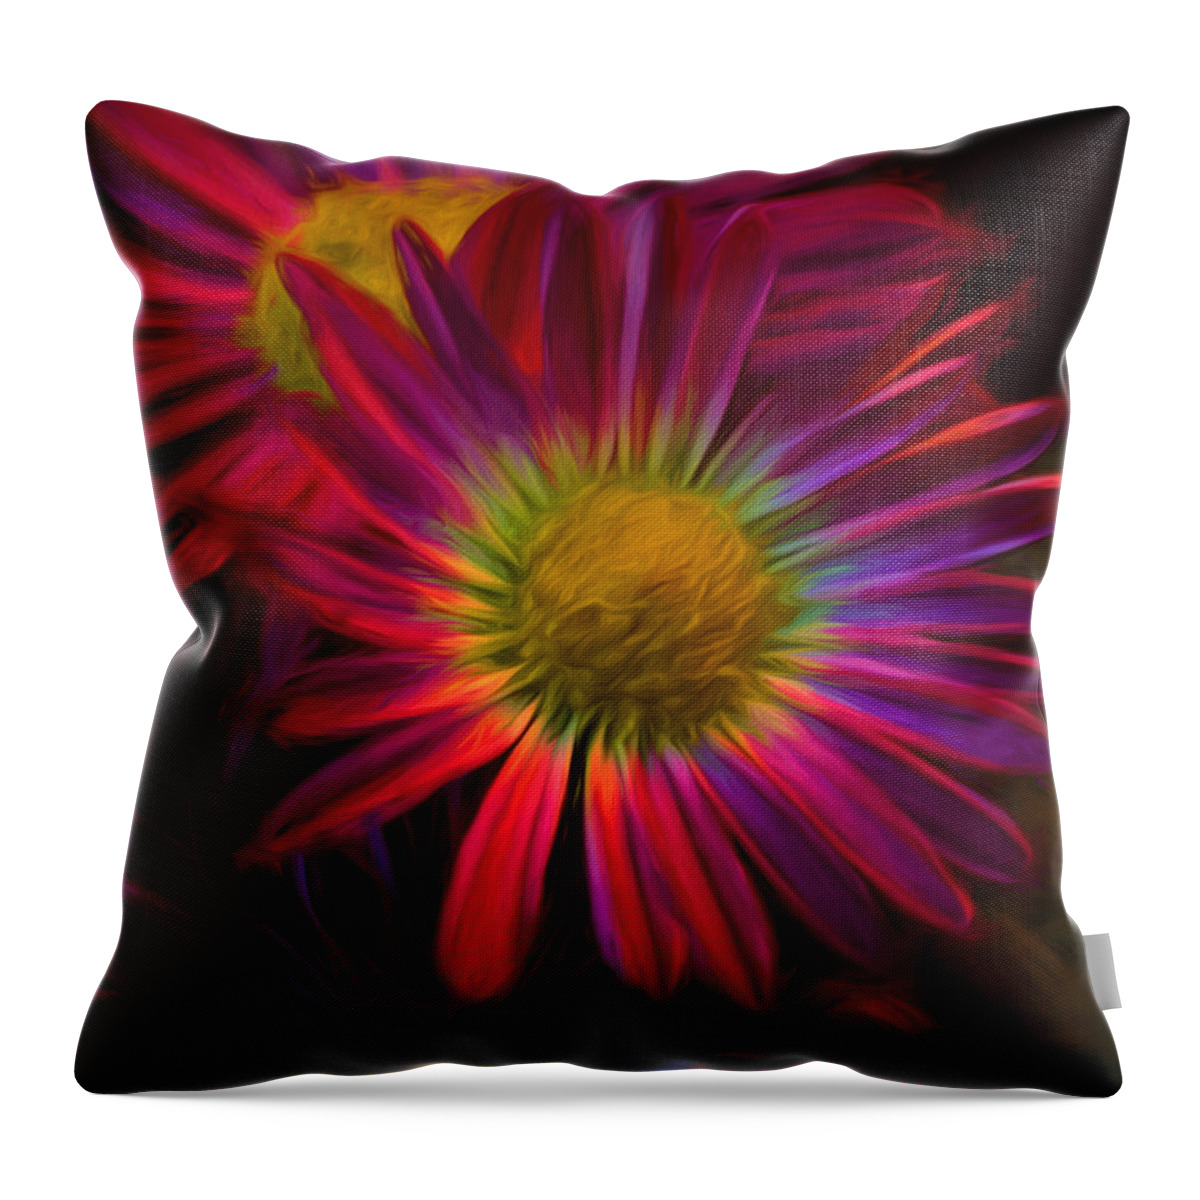 Flower Throw Pillow featuring the digital art Glowing eye of flower by Lilia S